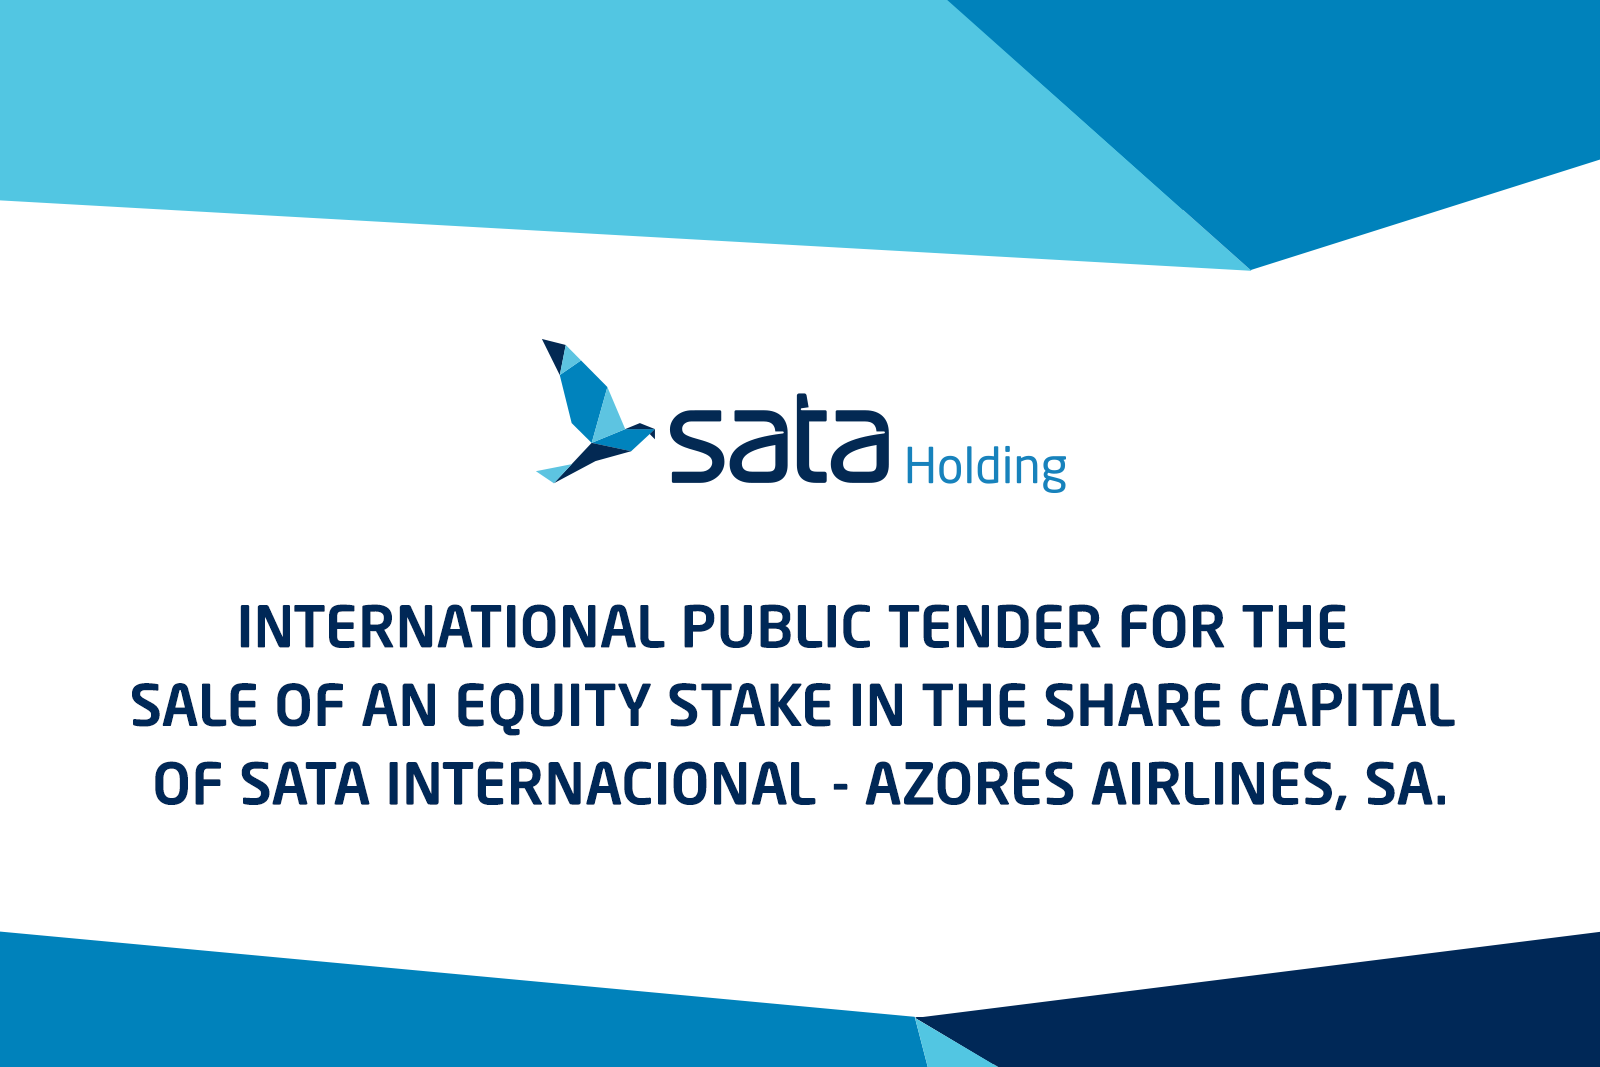 International public tender for the sale of an equity stake in the share capital of SATA Internacional - Azores Airlines, SA.